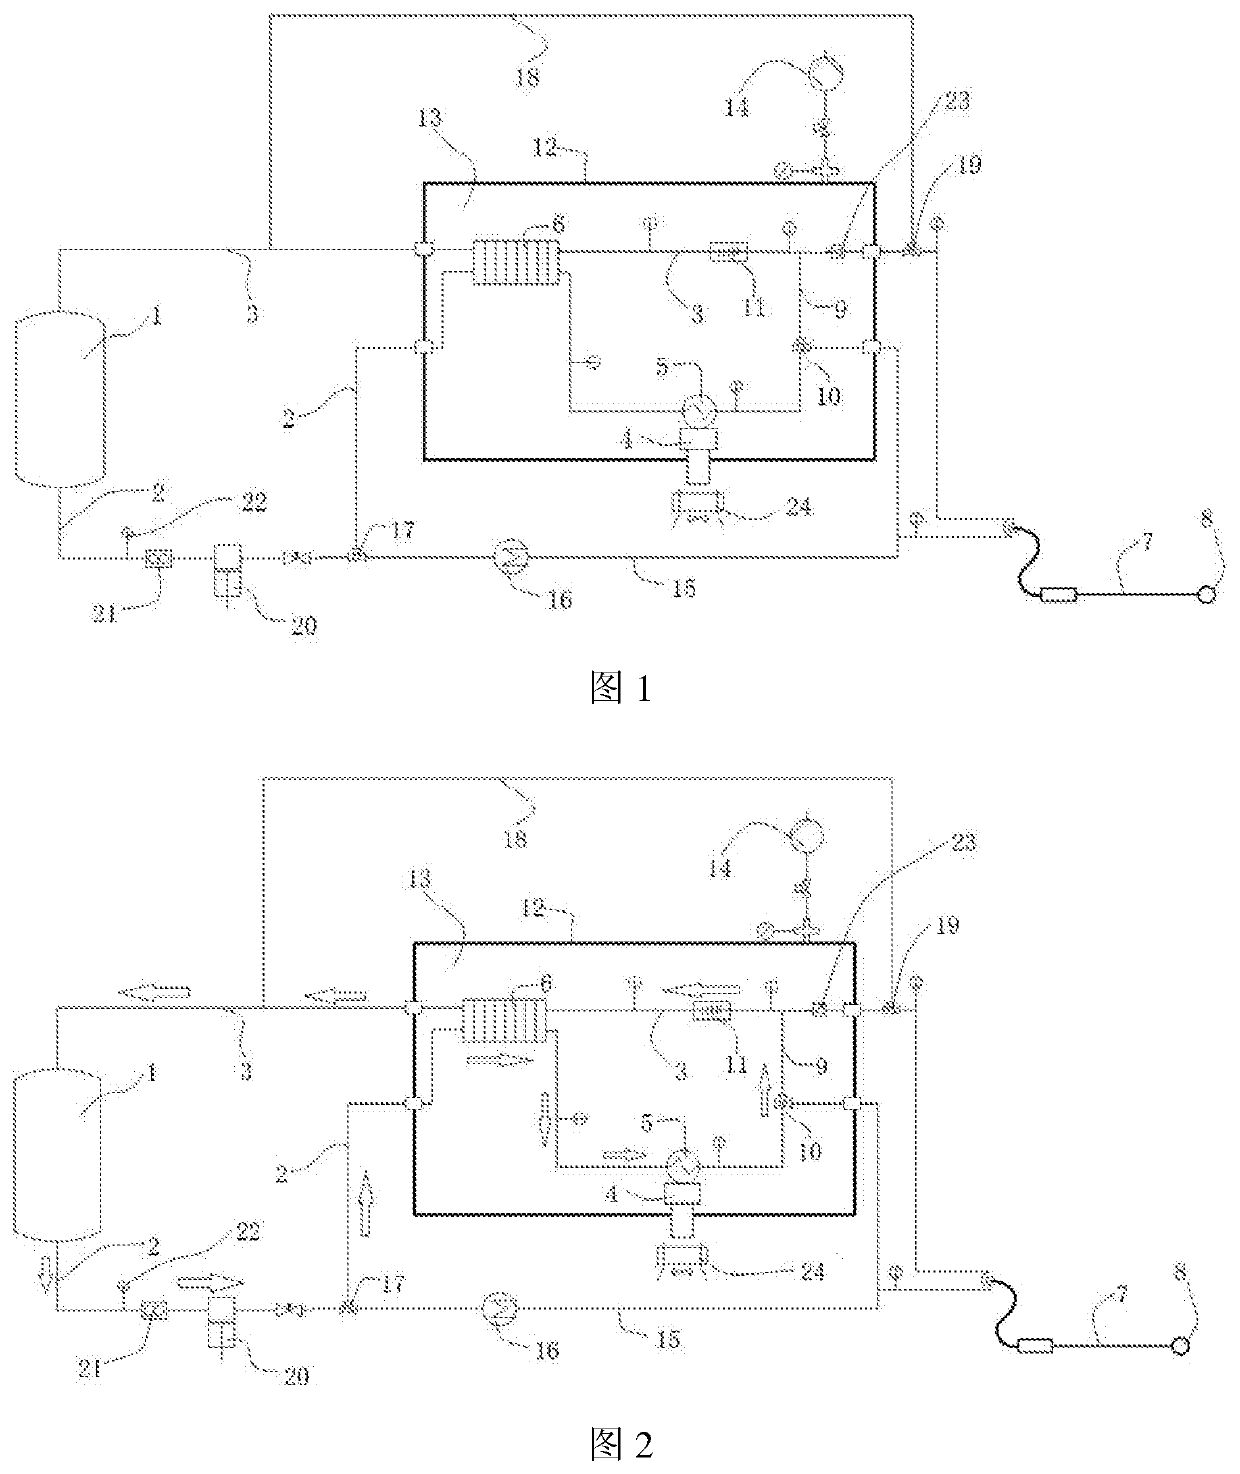 Cryoablation apparatus and method